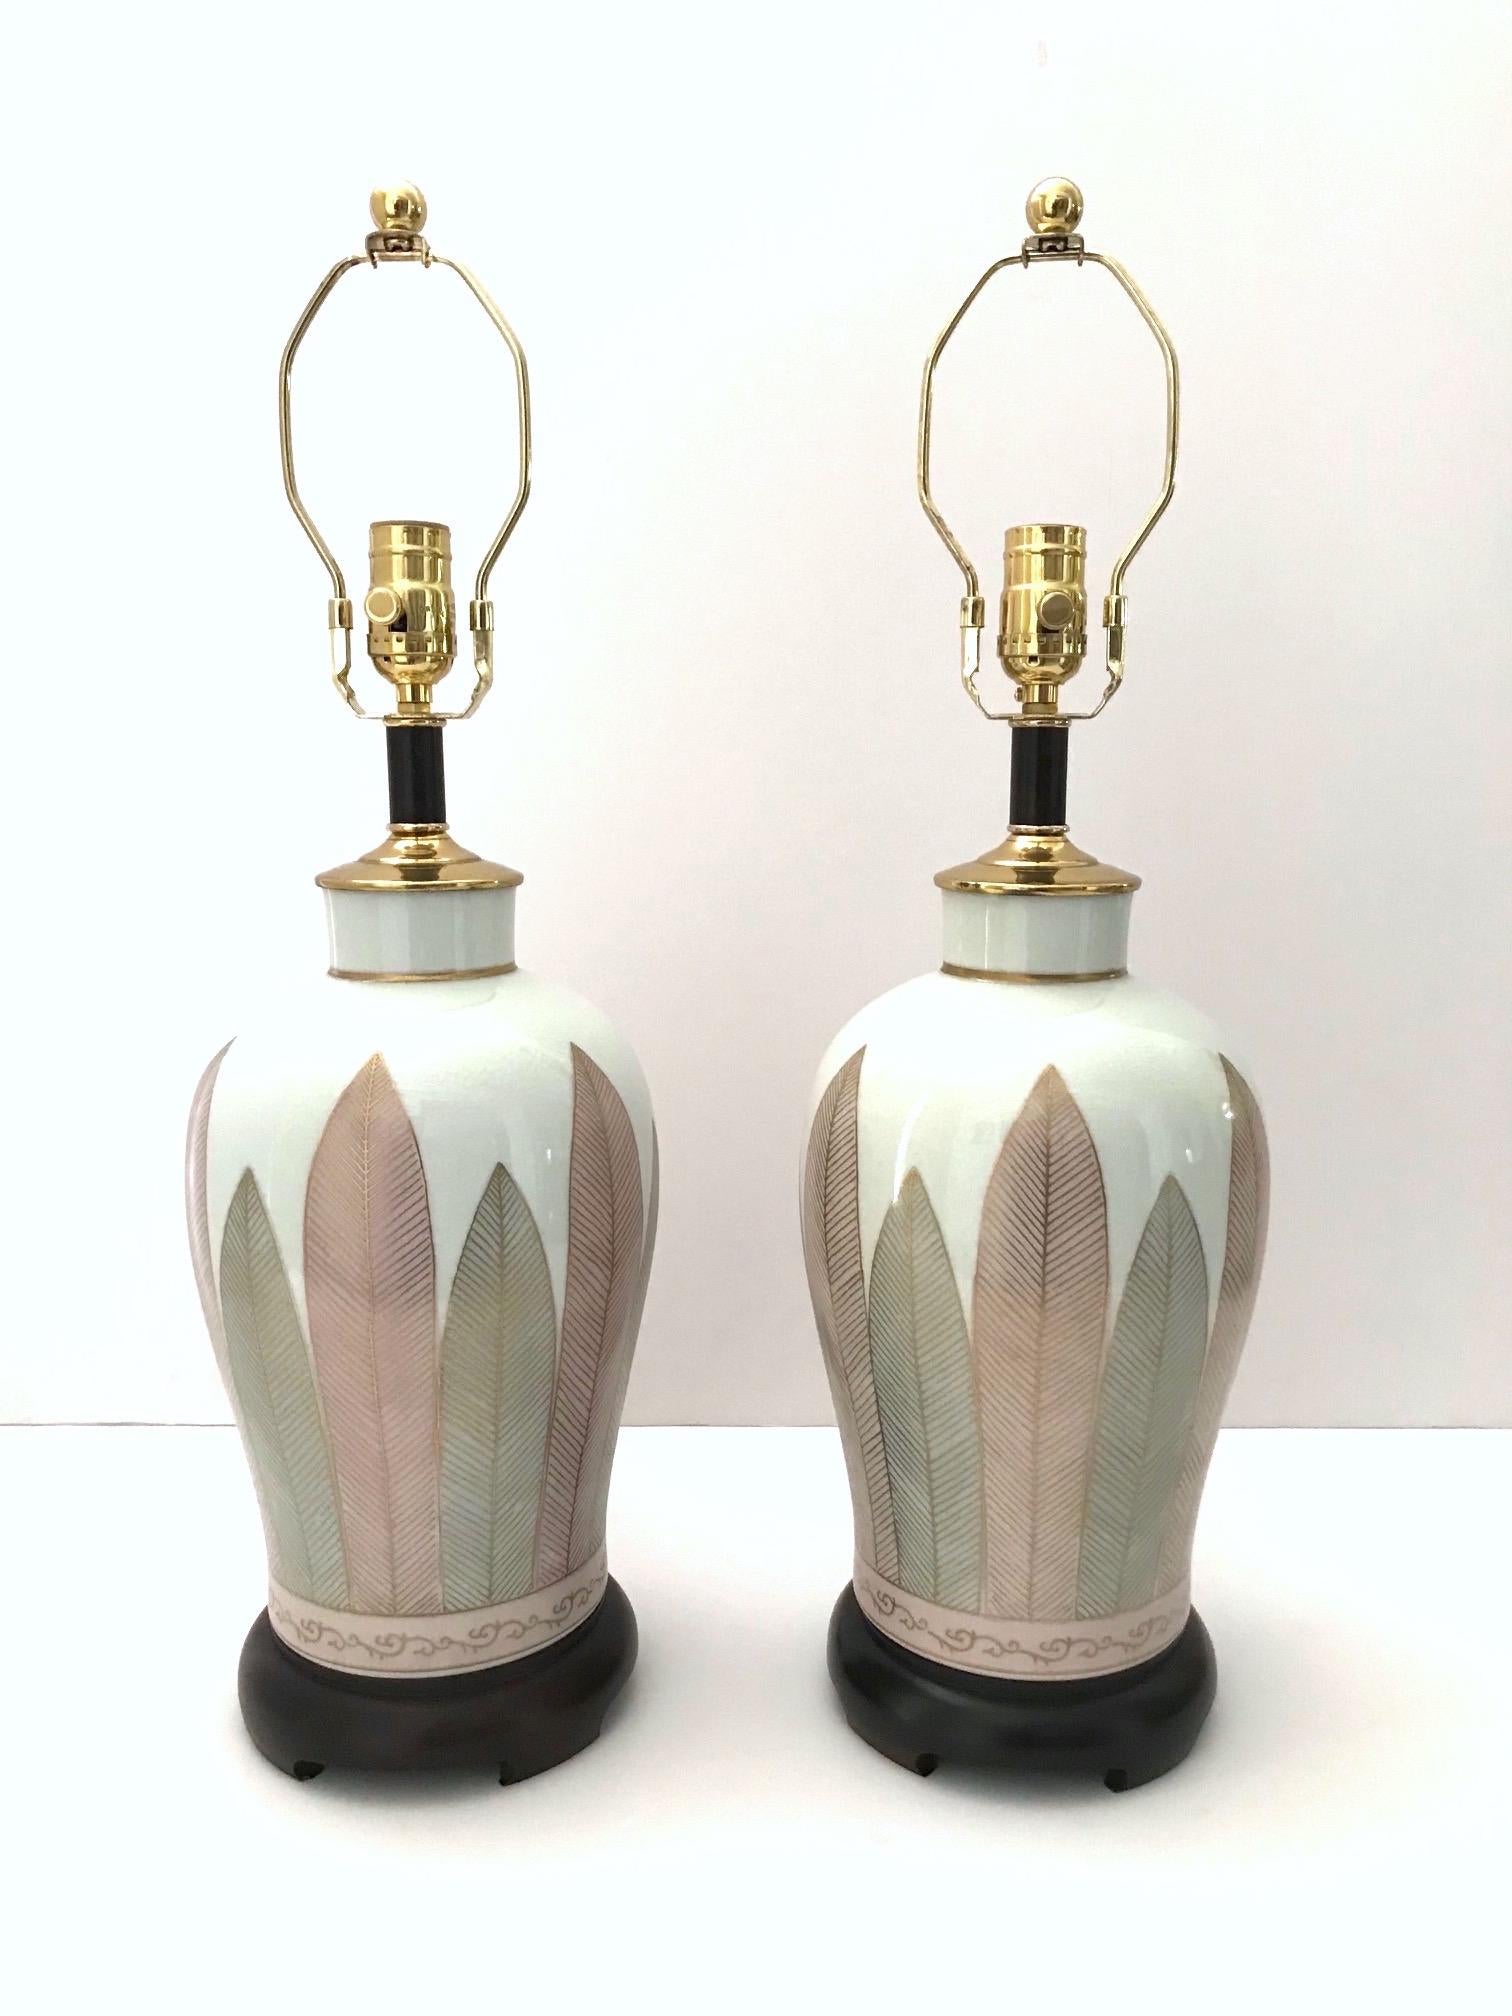 Hand-Carved Pair of Japanese Hand Painted Porcelain Lamps in White, Grey, and Pink, C. 1970s For Sale